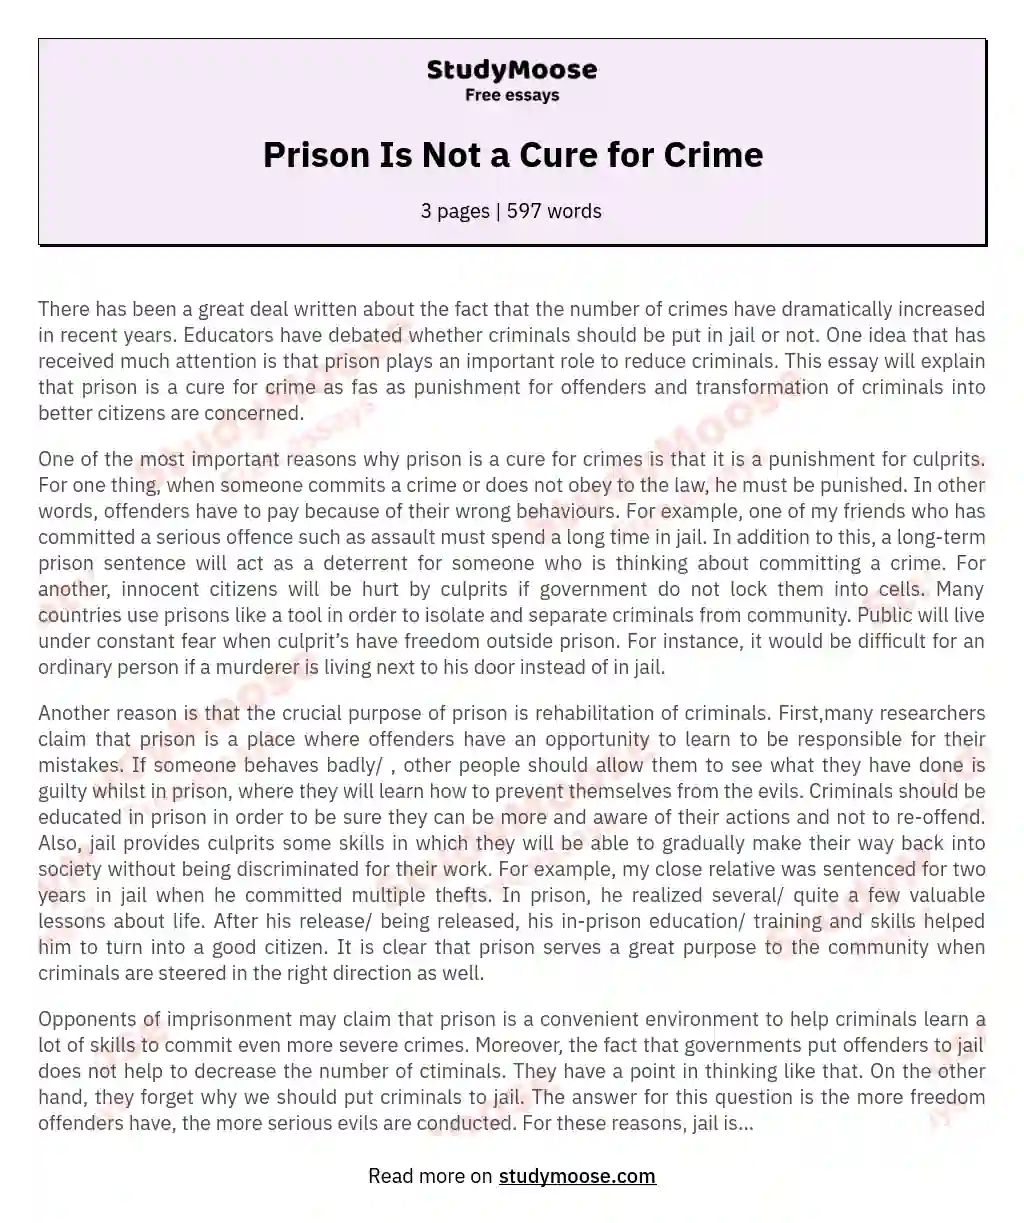 Prison Is Not a Cure for Crime